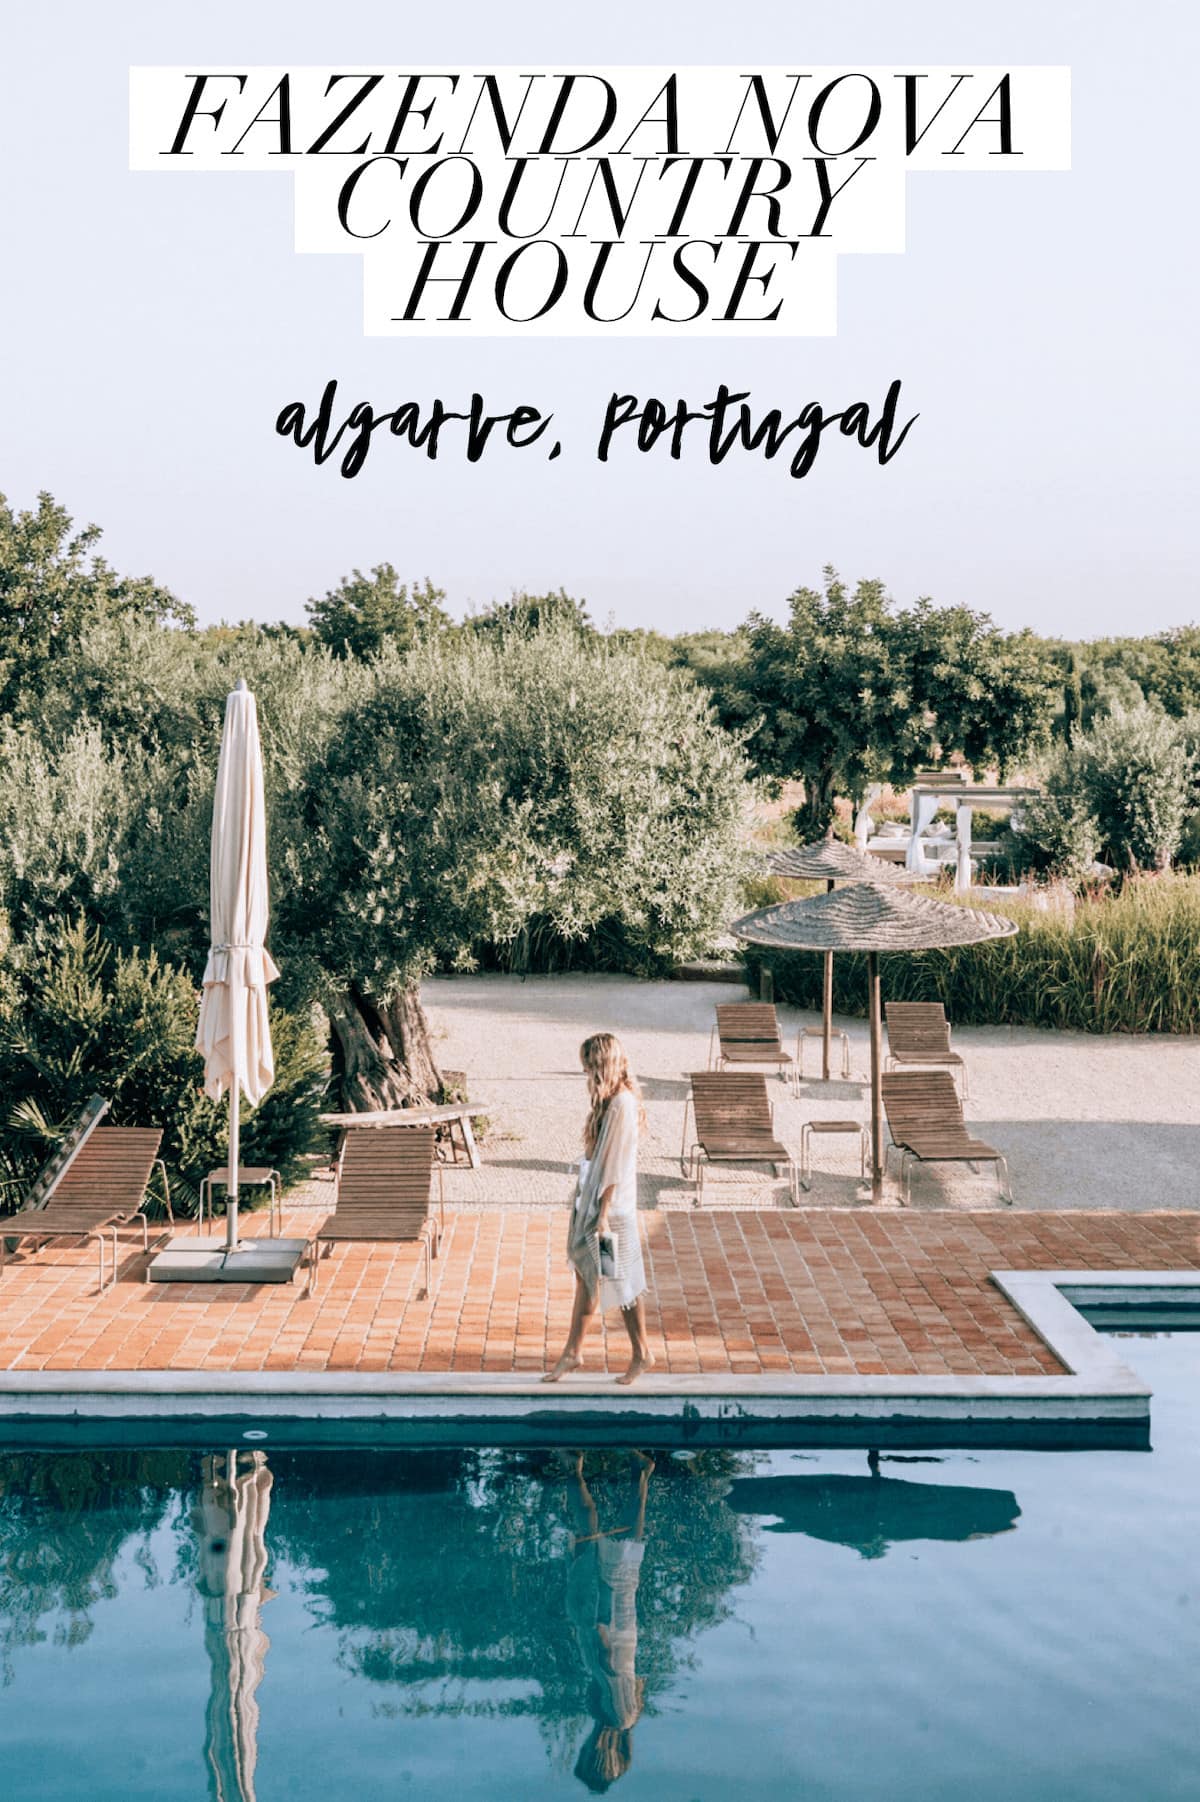 Staying at Fazenda Nova Country House, a Boutique Hotel in Algarve, Portugal | Boutique hotel Algarve | Algarve Portugal hotels | Where to stay in Algarve | Best hotels in Algarve |